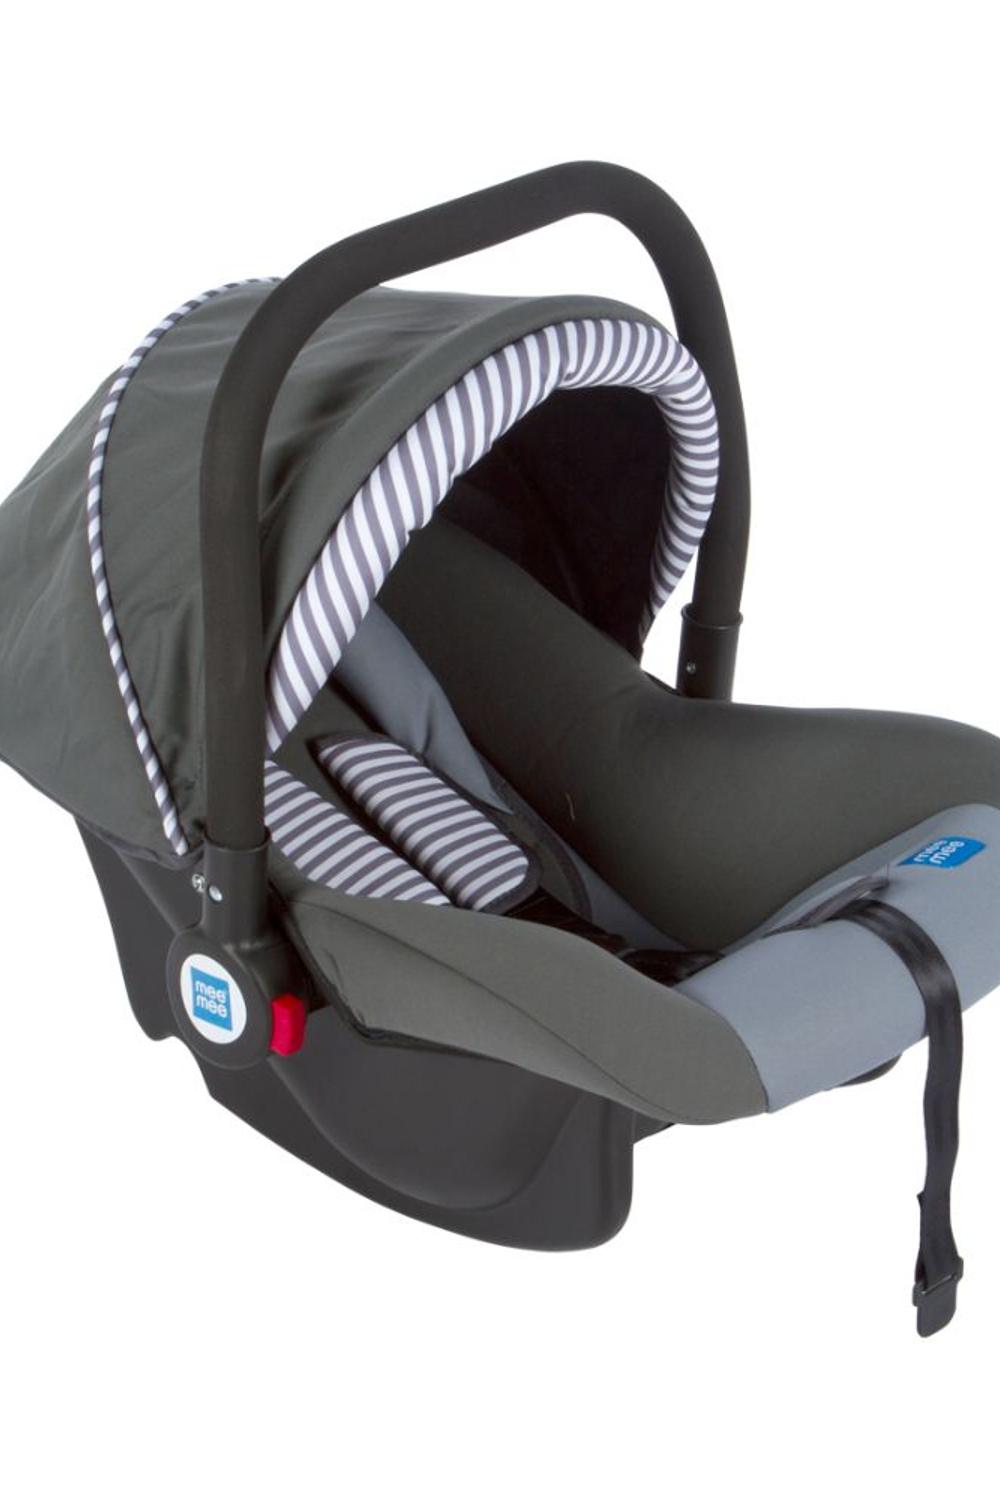 Mee Mee Baby Car Seat Cum Carry Cot with Thick Cushioned Seat and Head Support